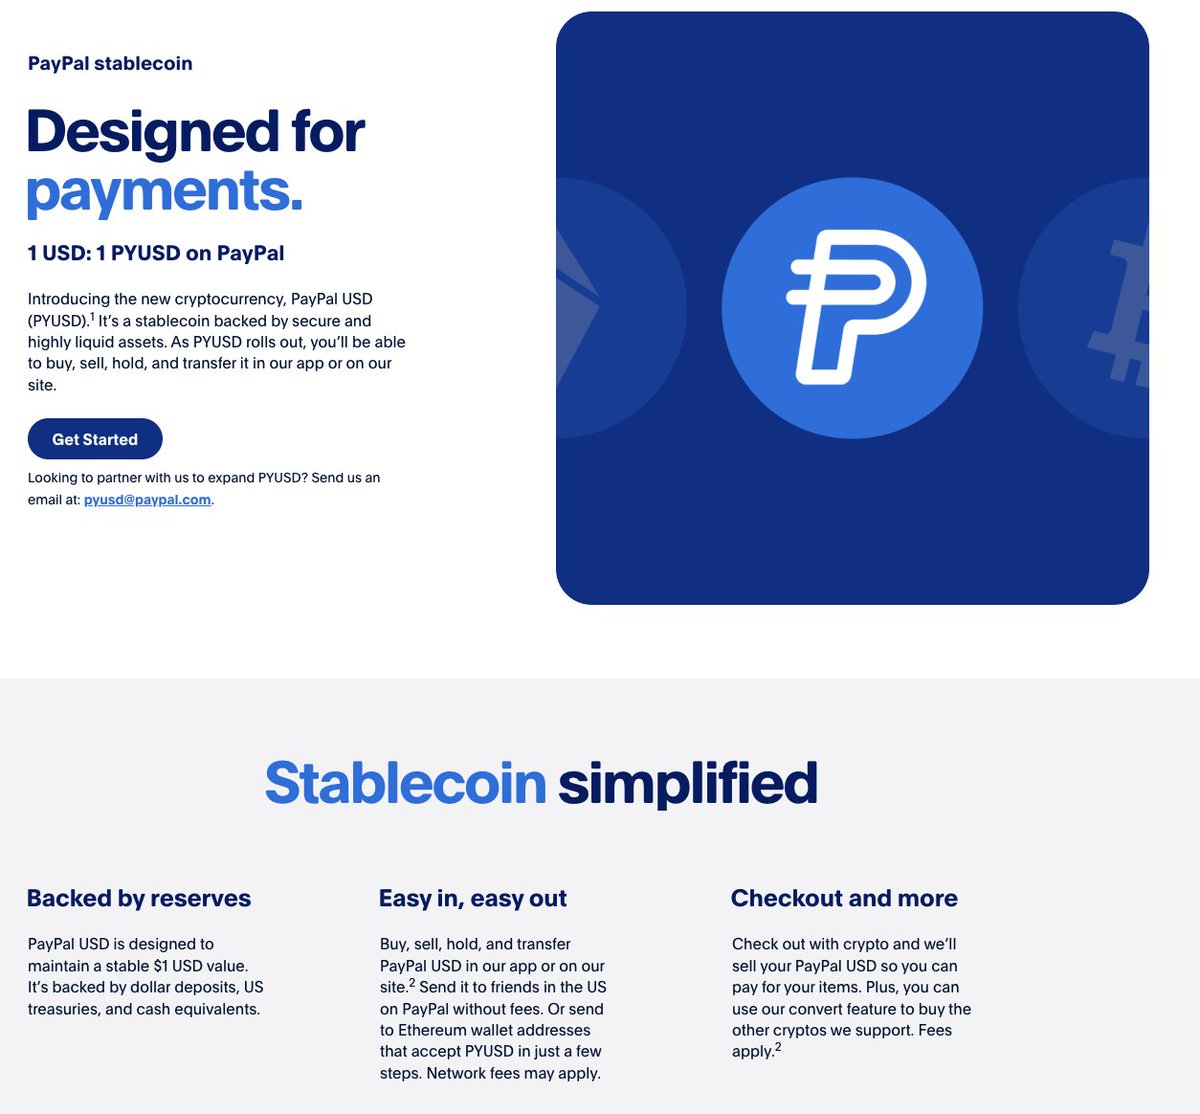 Let’s revisit @PayPal's venture into the stablecoin arena, which @sytaylor and I first featured in our NOT FINTECH INVESTMENT ADVICE series on the pod👇 HERE'S WHAT WE SAID THEN: As a leading publicly traded fintech company, PayPal’s move to introduce PYUSD last August in the…